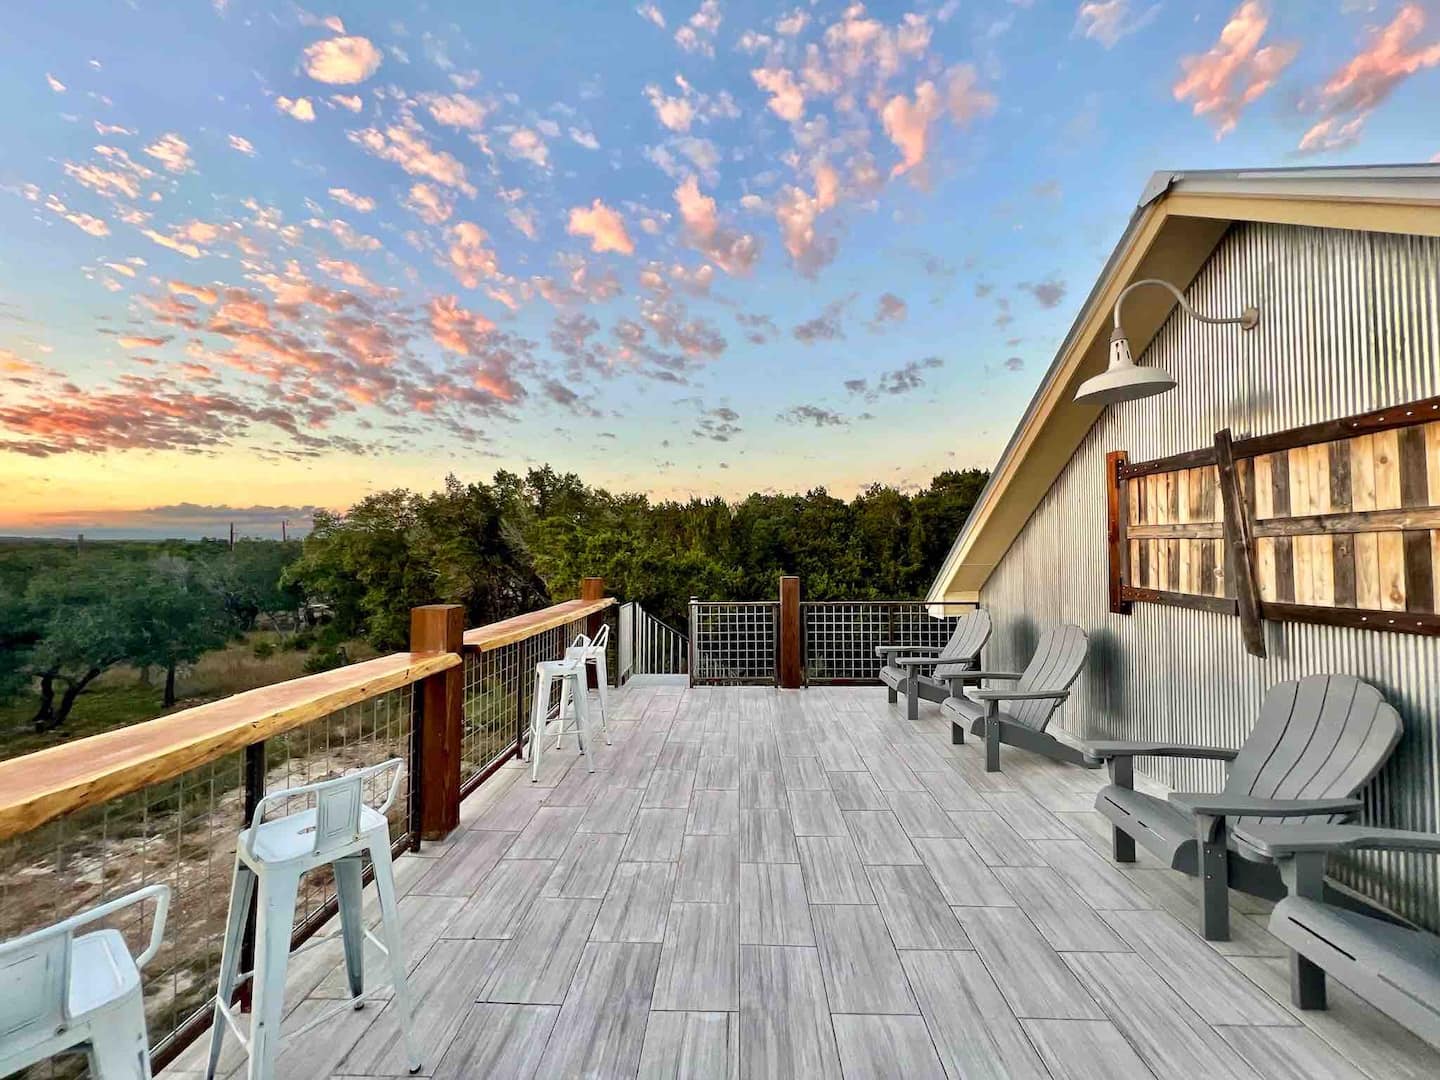 Sunset Cabin on the Blanco River